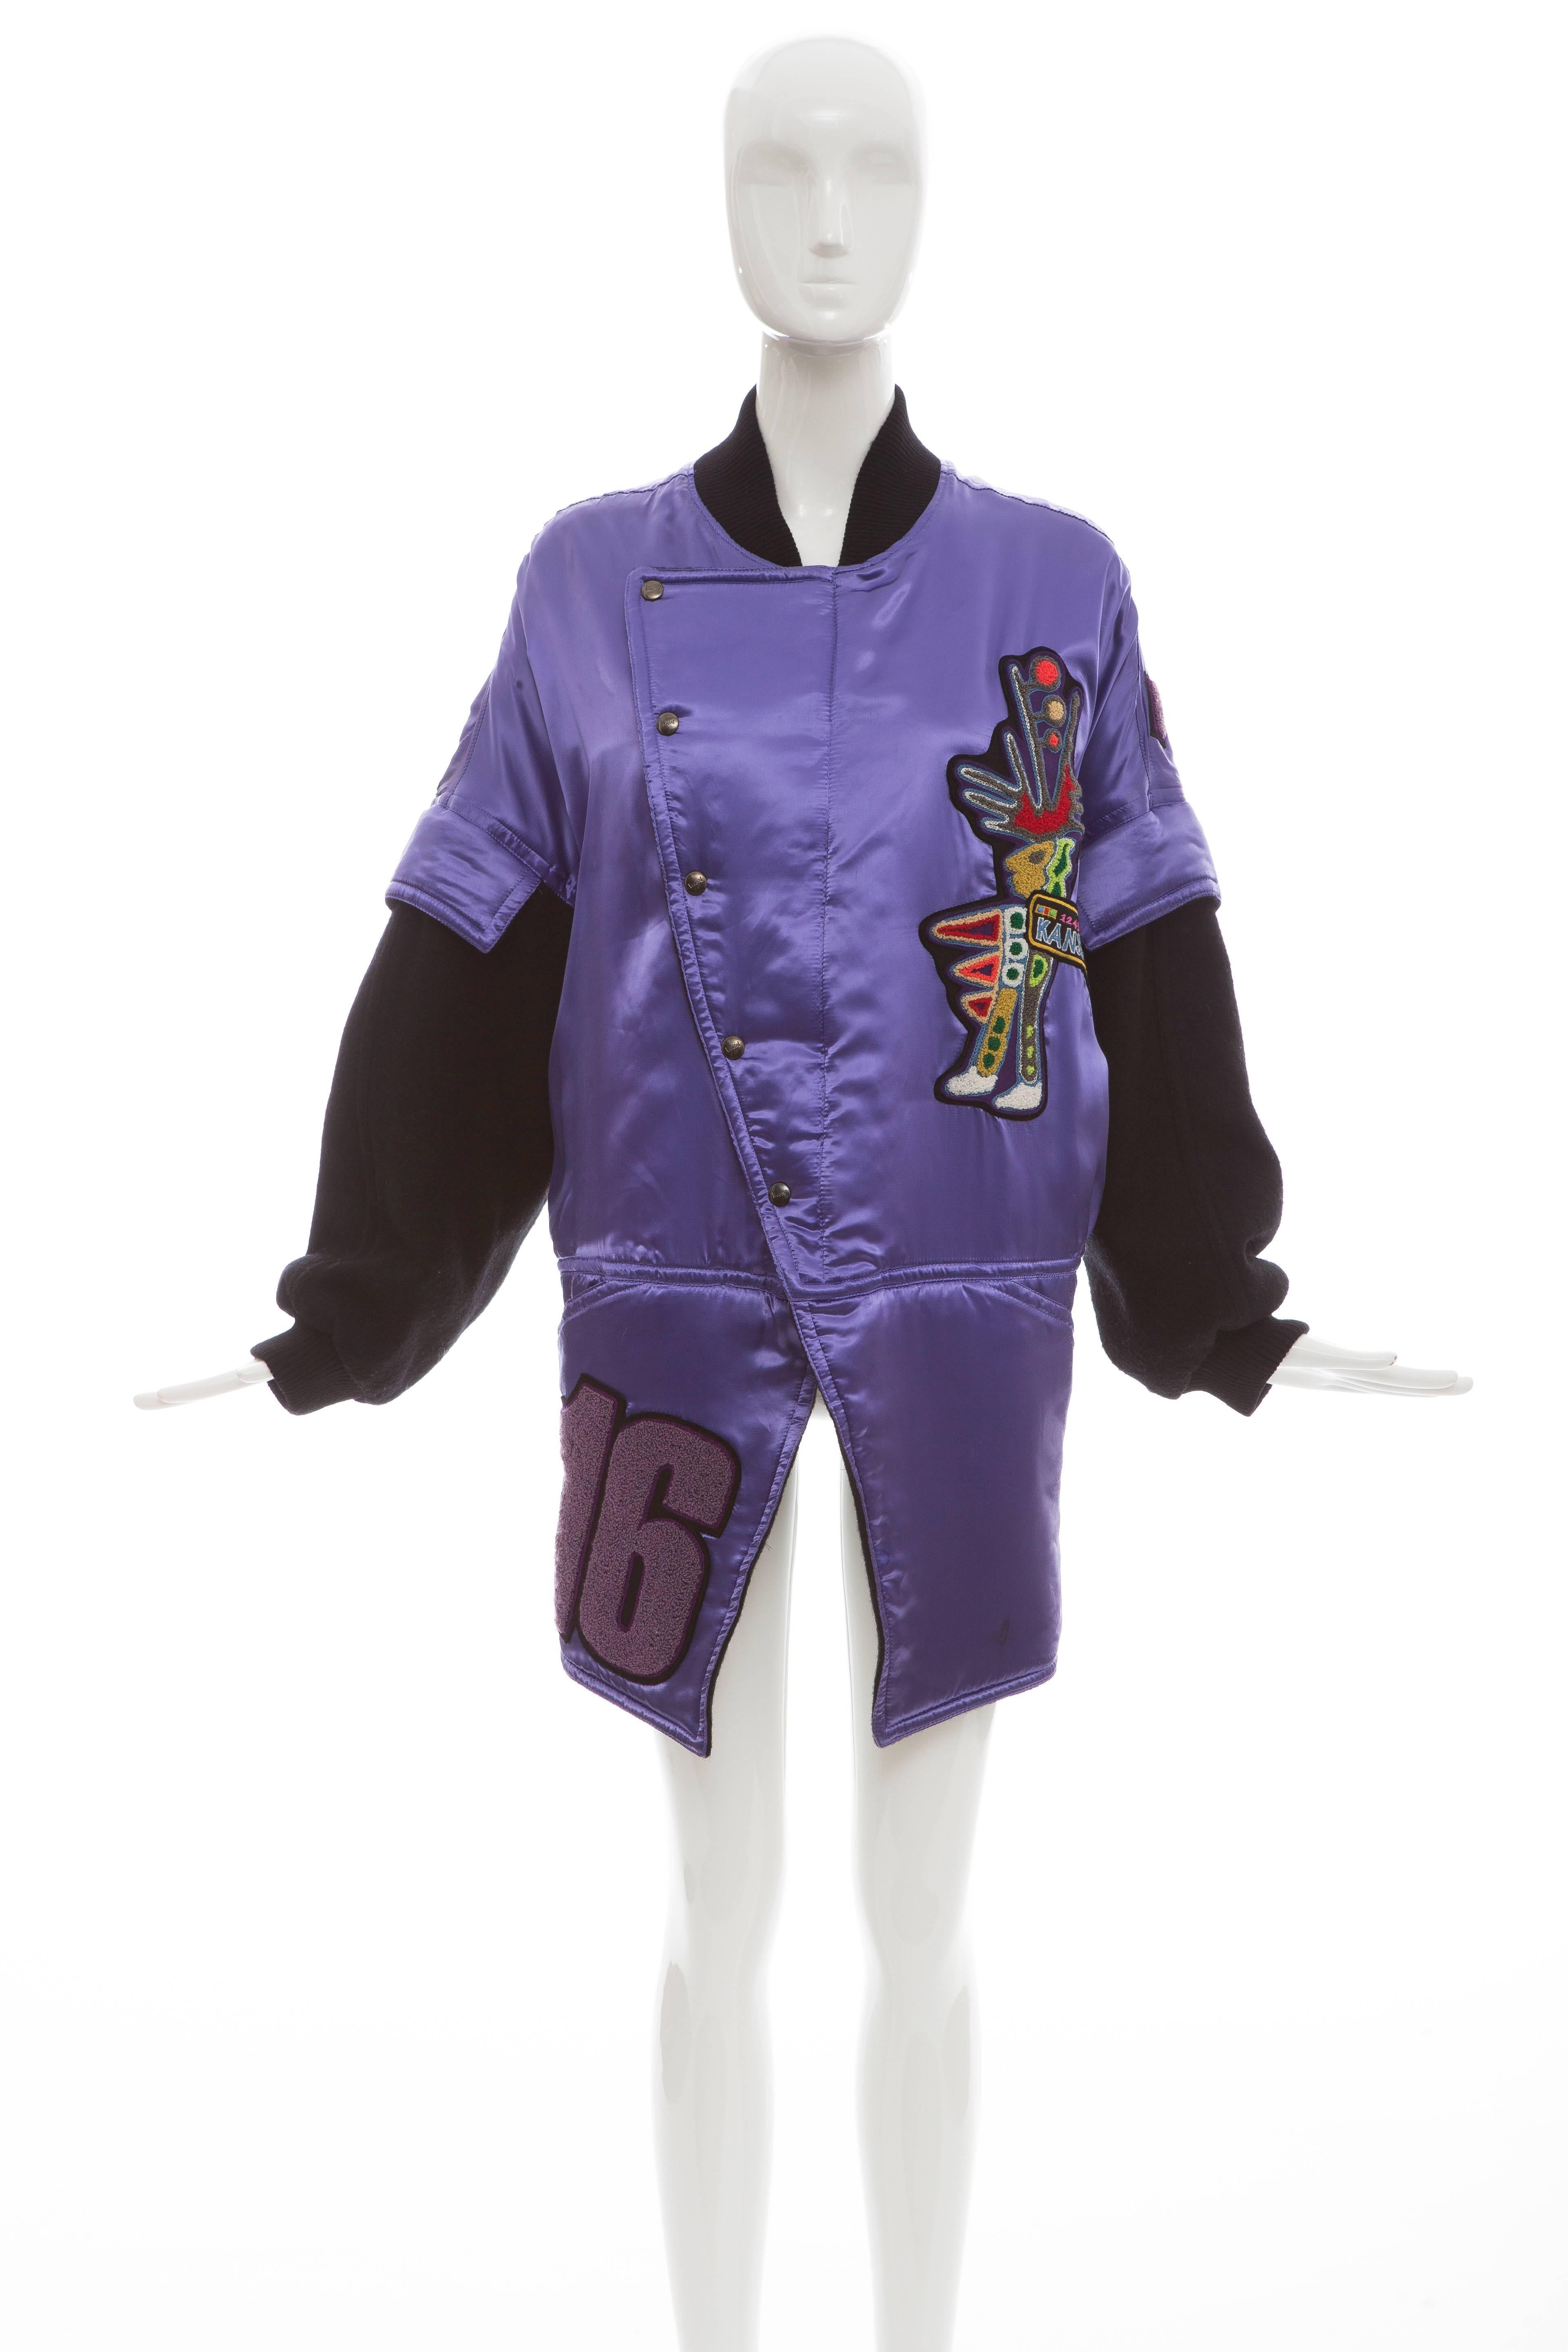 Kansai Yamamoto, circa 1980's, purple satin jacket, snap and zip front, two front pockets, wool sleeves and appliquéd patches.

Japan: Small